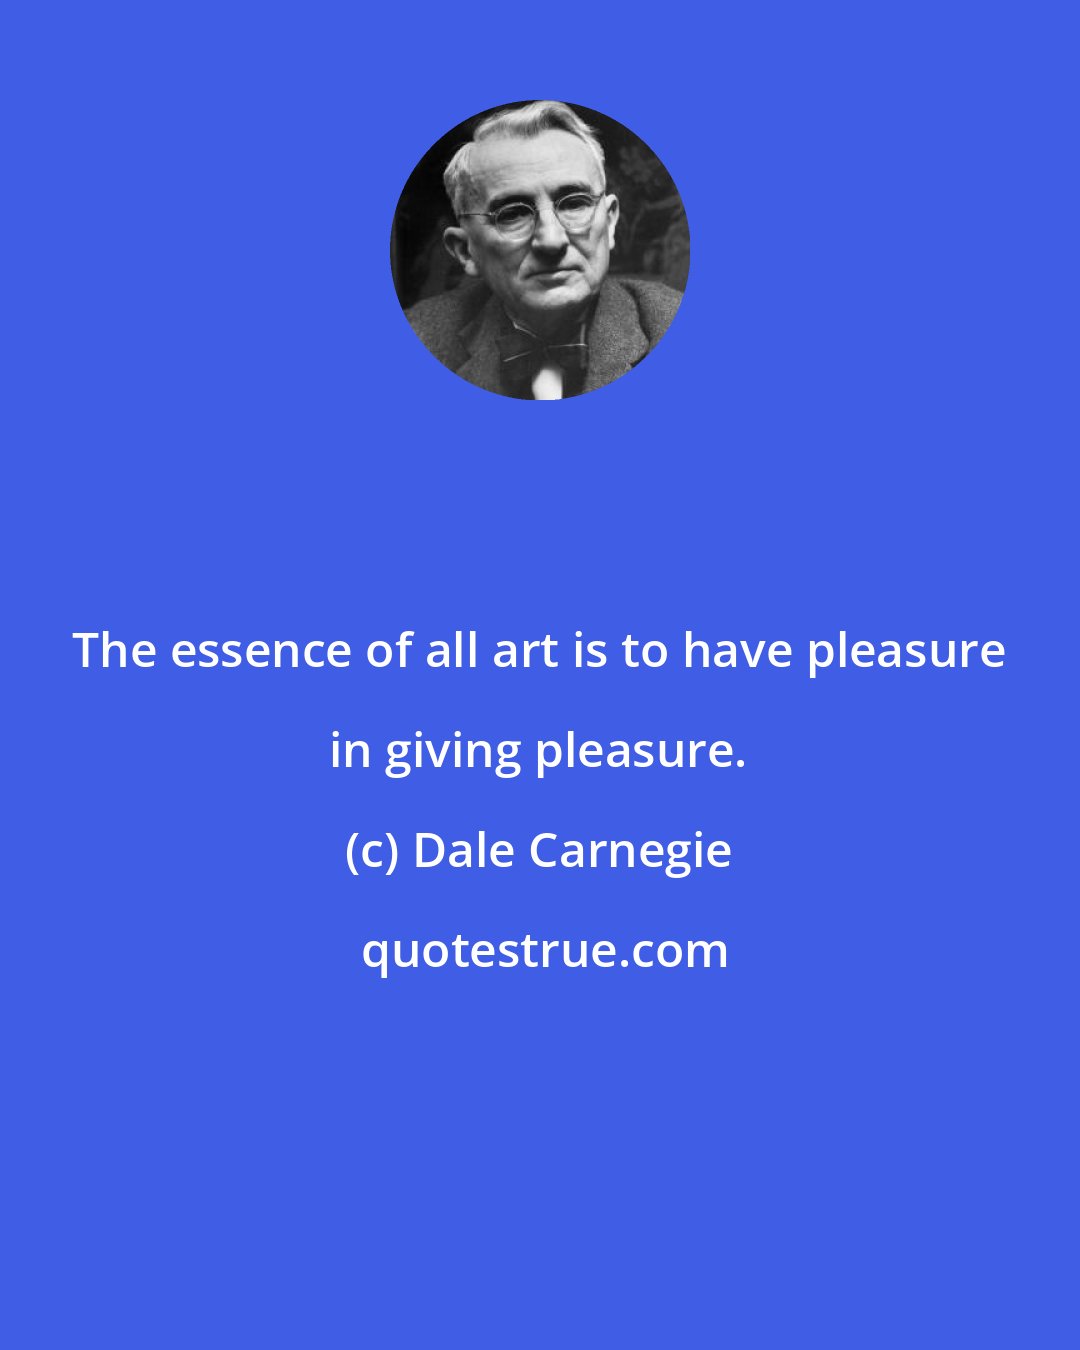 Dale Carnegie: The essence of all art is to have pleasure in giving pleasure.